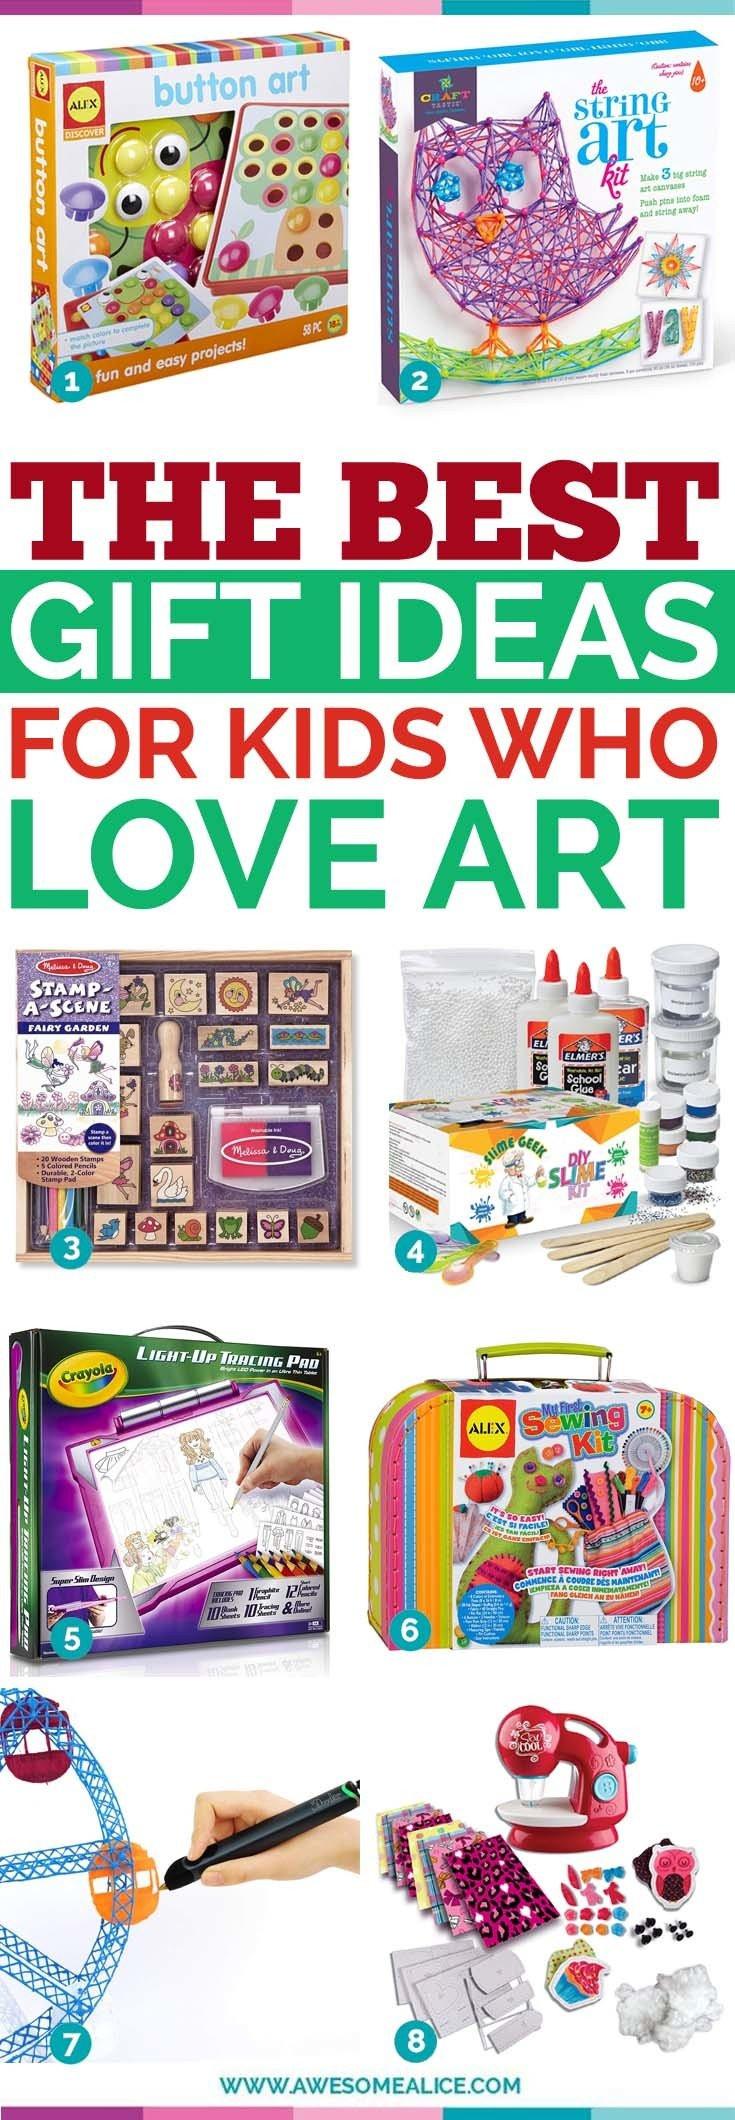 Creative Gifts For Kids
 Top 30 Gift Ideas for Creative Kids Who Love Art